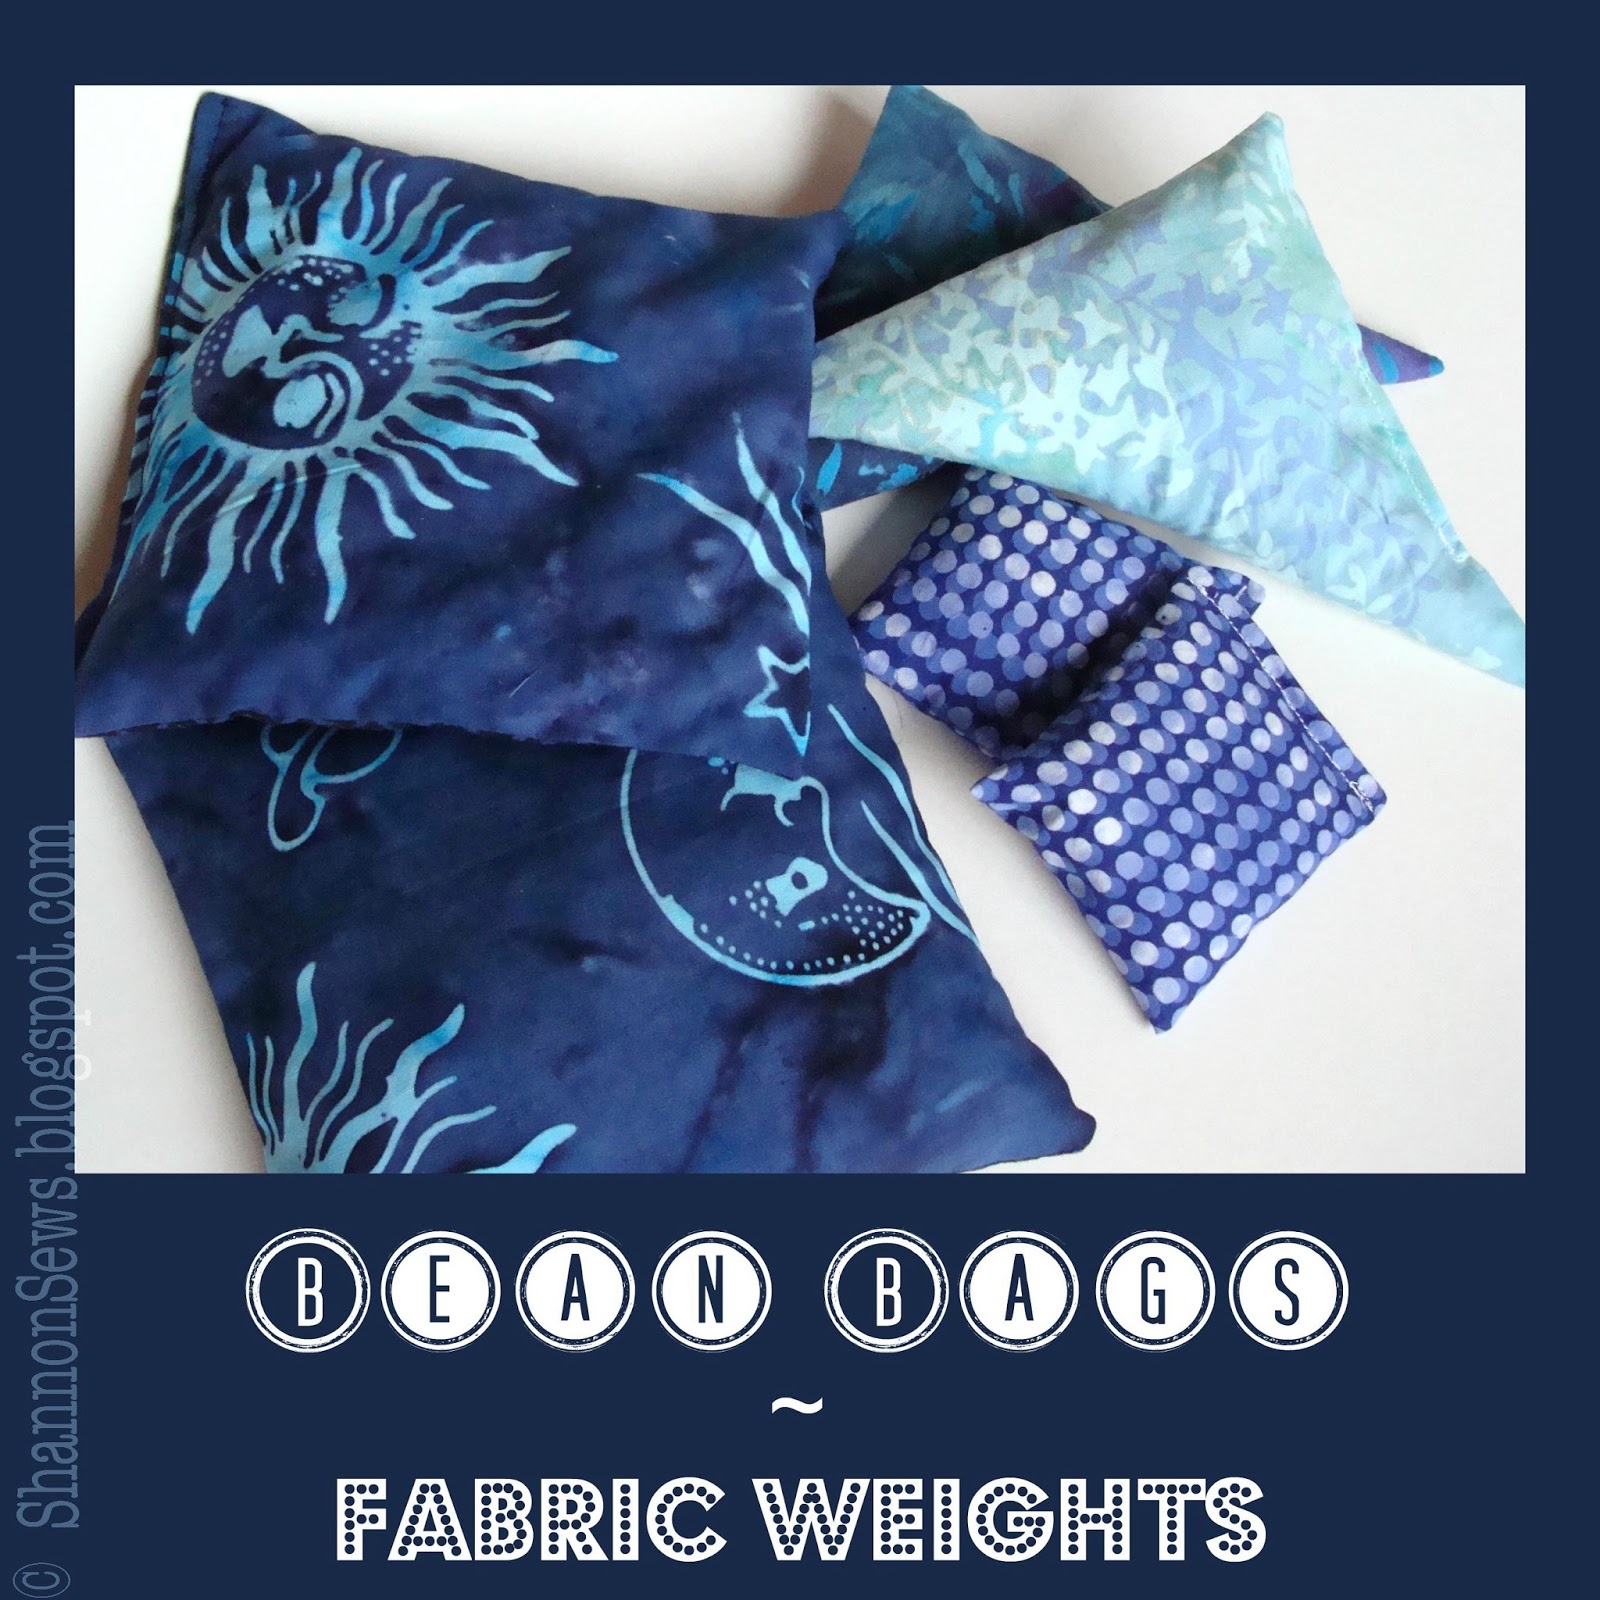 make your own bean bags or rice bags for fabric weights